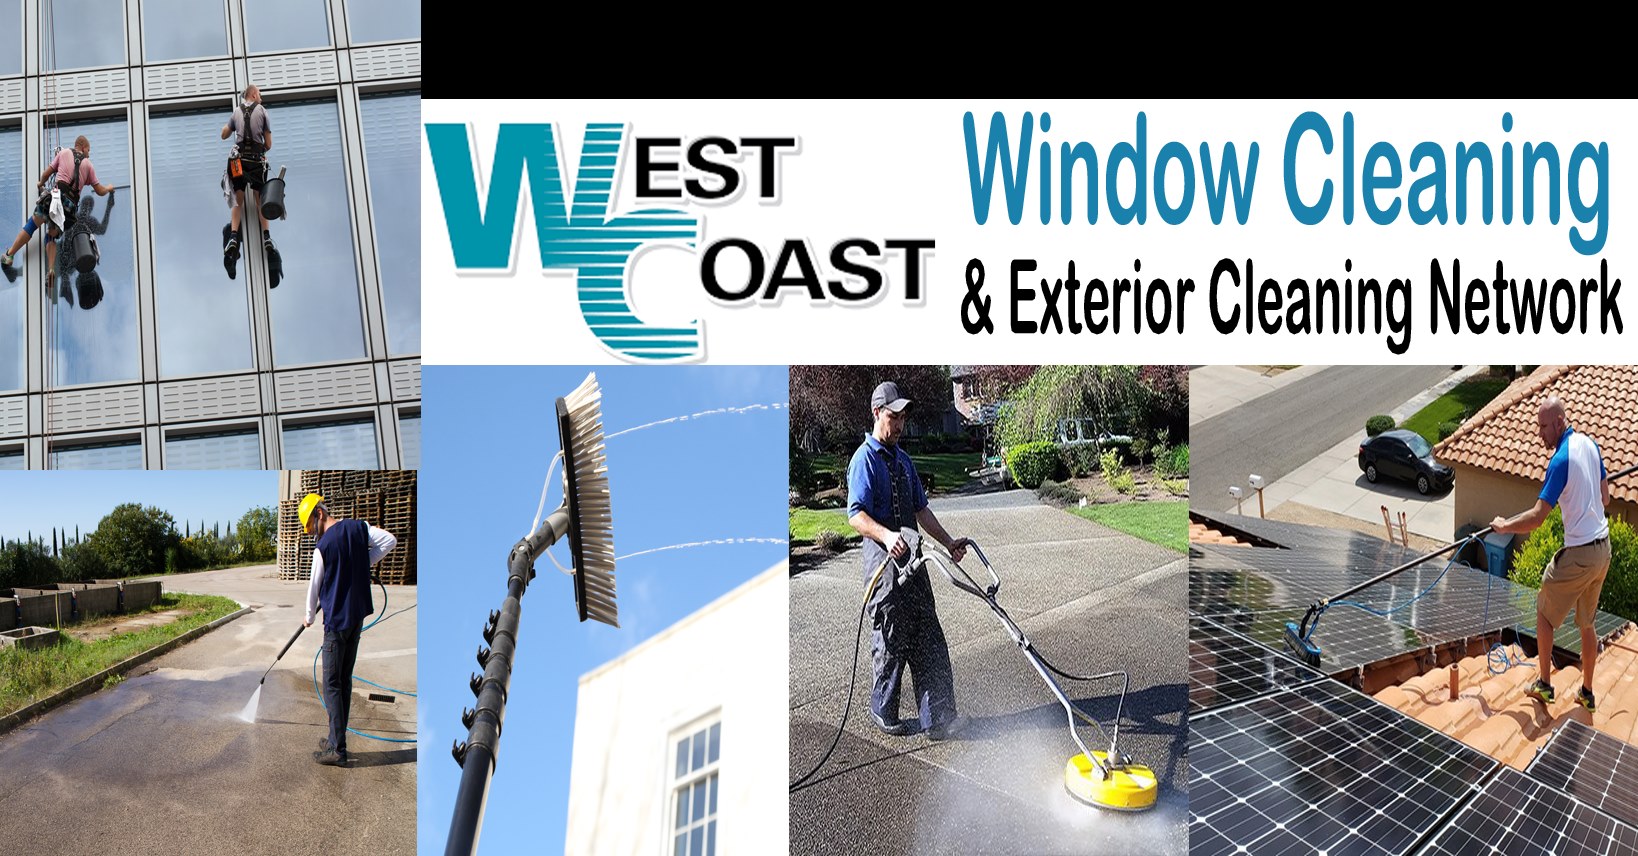 Outer Glass Cleaning 055 84 26325 in Dubai